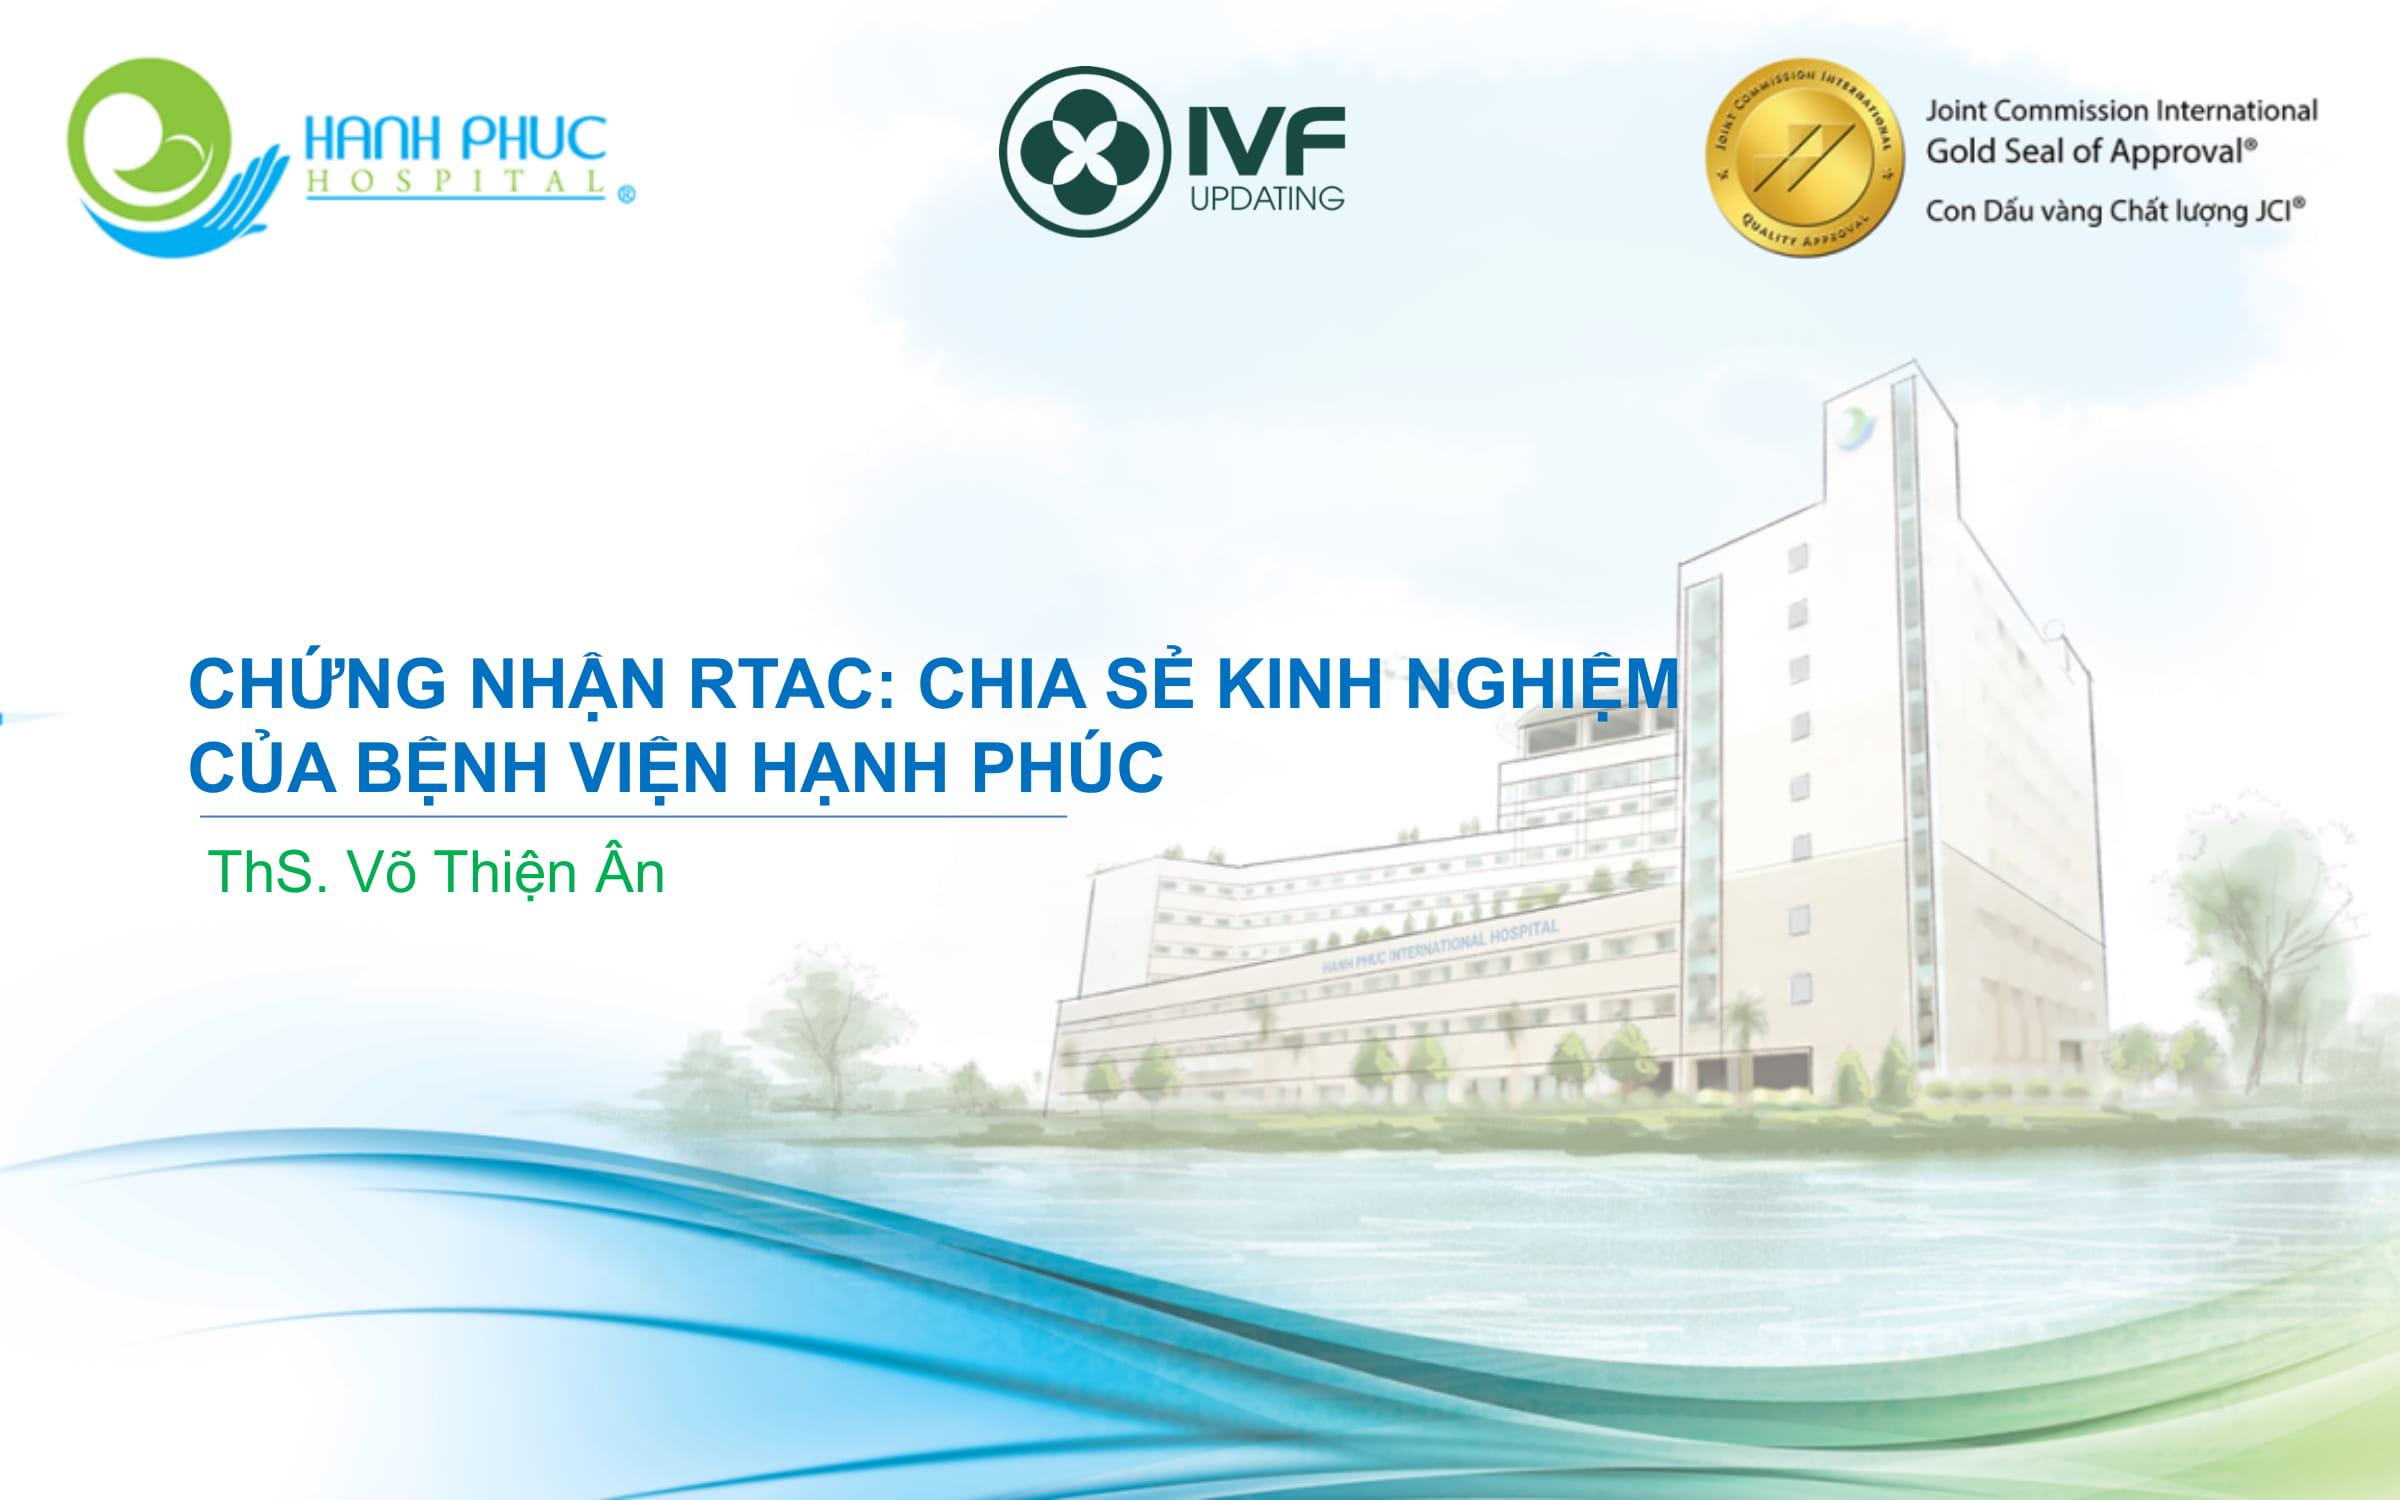 BS Vo Thien An Report_IVF UPDATING 5-01